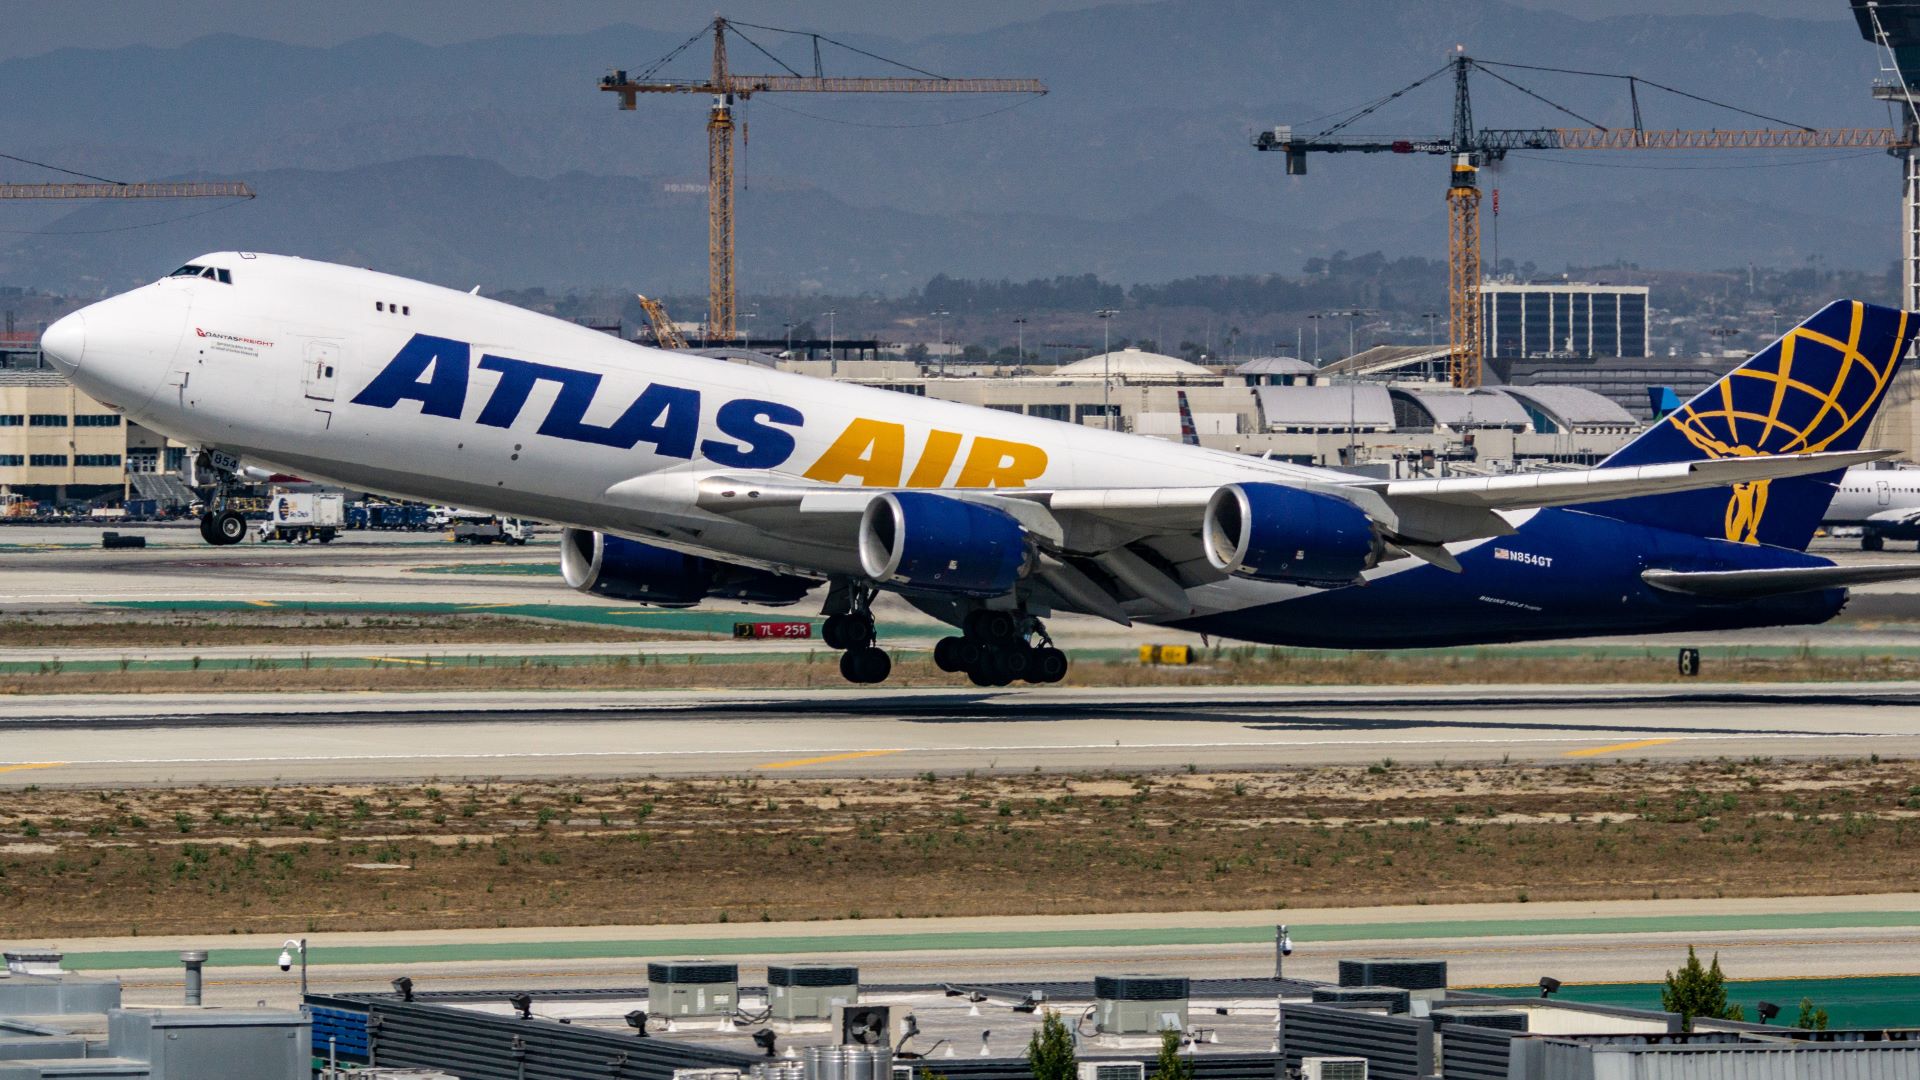 An Atlas Air jumbo cargo jet takes off, with front wheel in air. The plane is white, with purple and gold lettering.